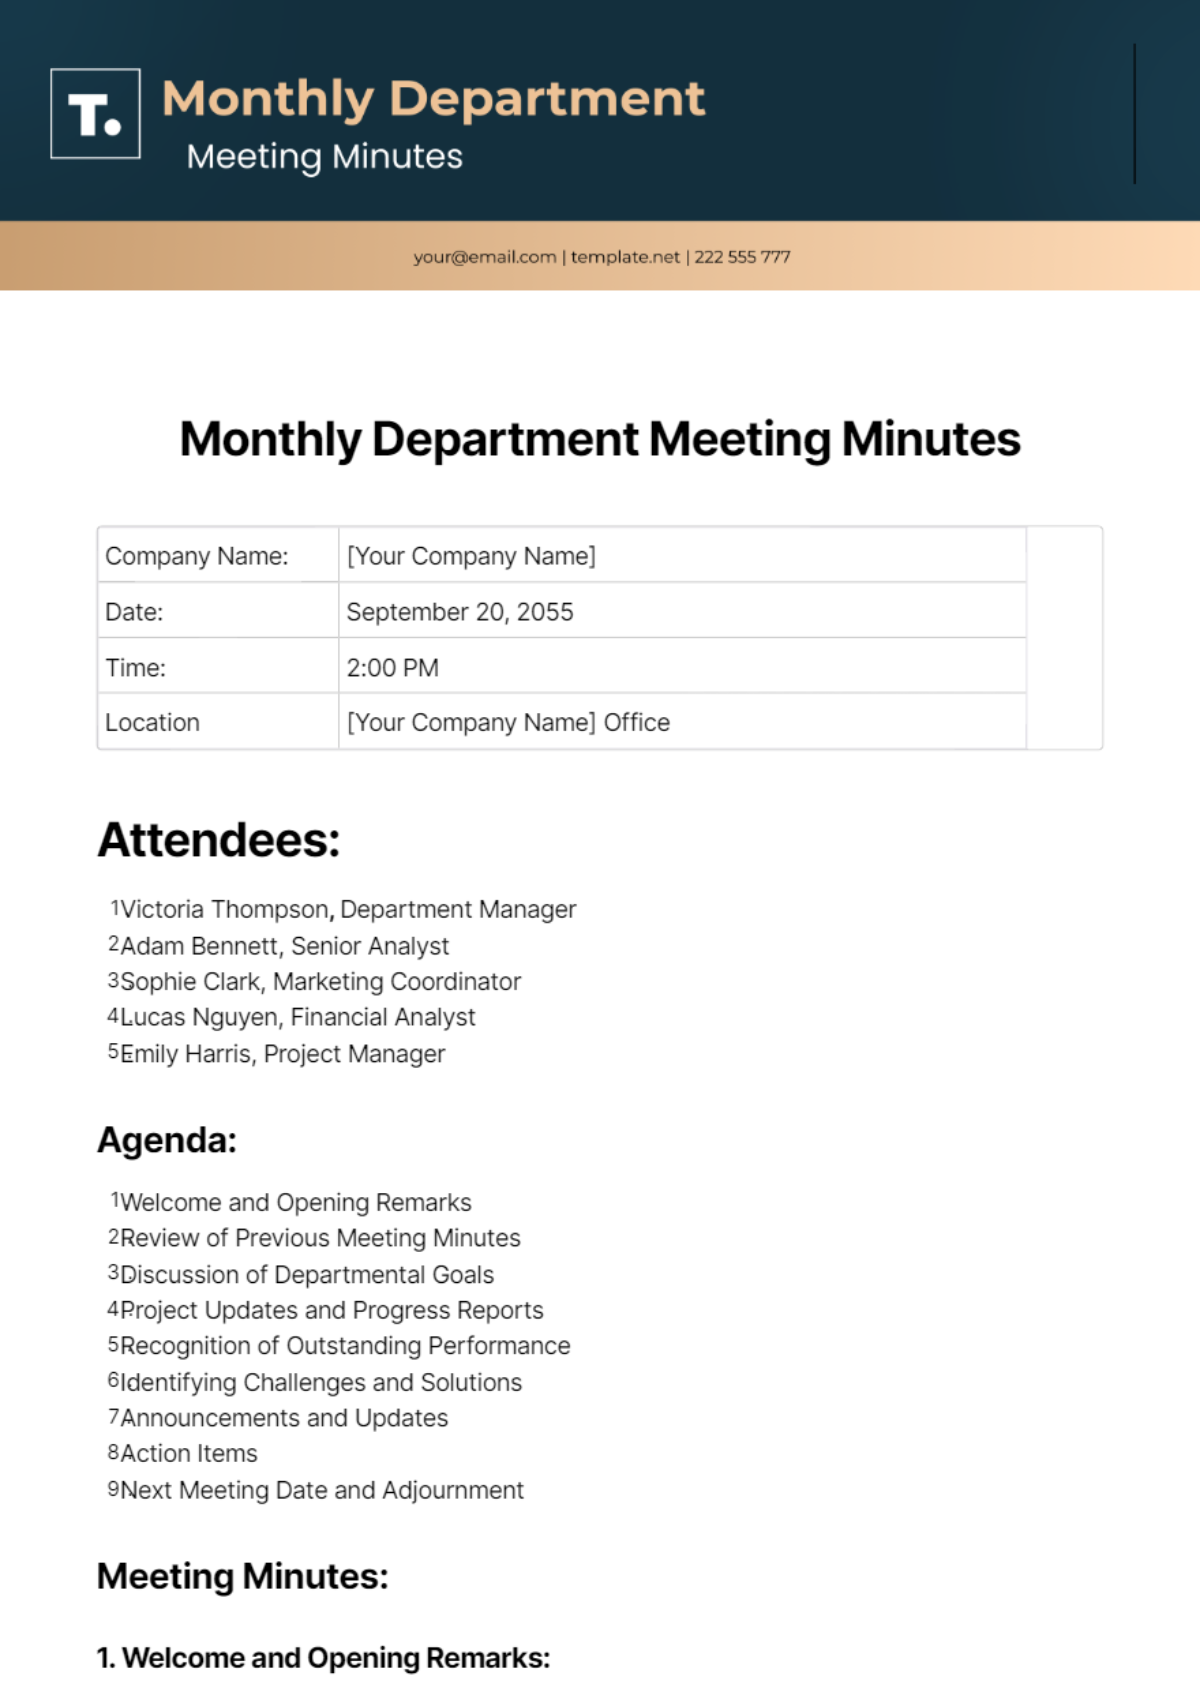 Monthly Department Meeting Minutes Template